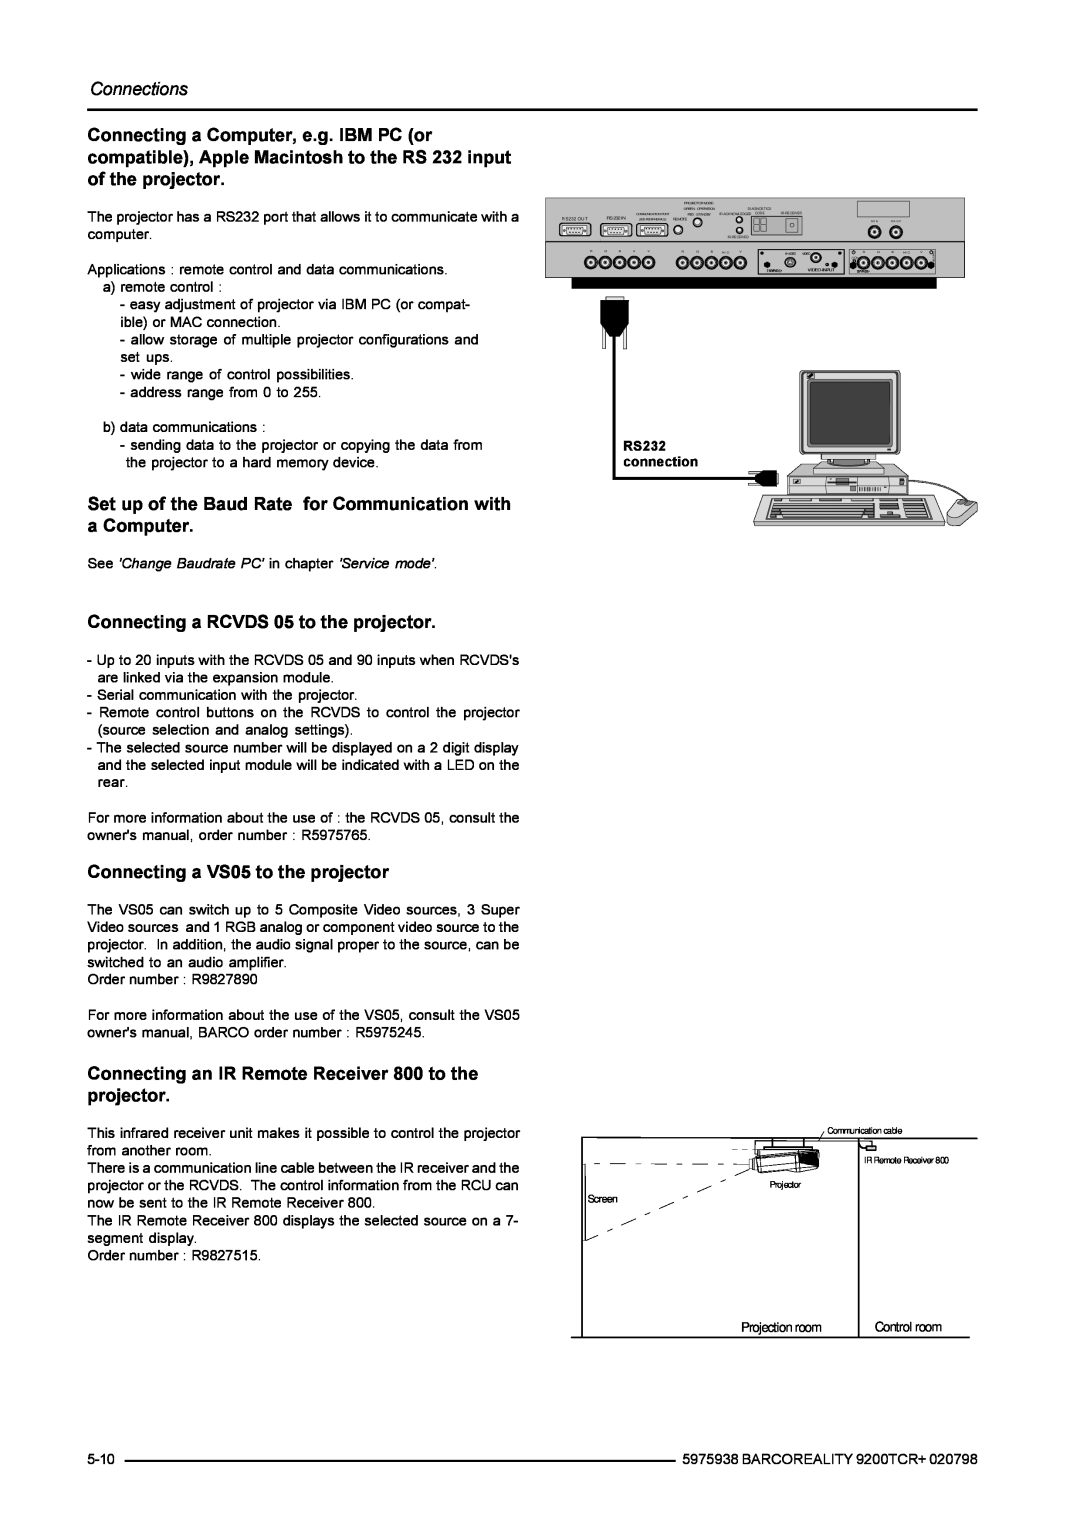 Barco R9001390 manual Set up of the Baud Rate for Communication with a Computer, Connecting a RCVDS 05 to the projector 